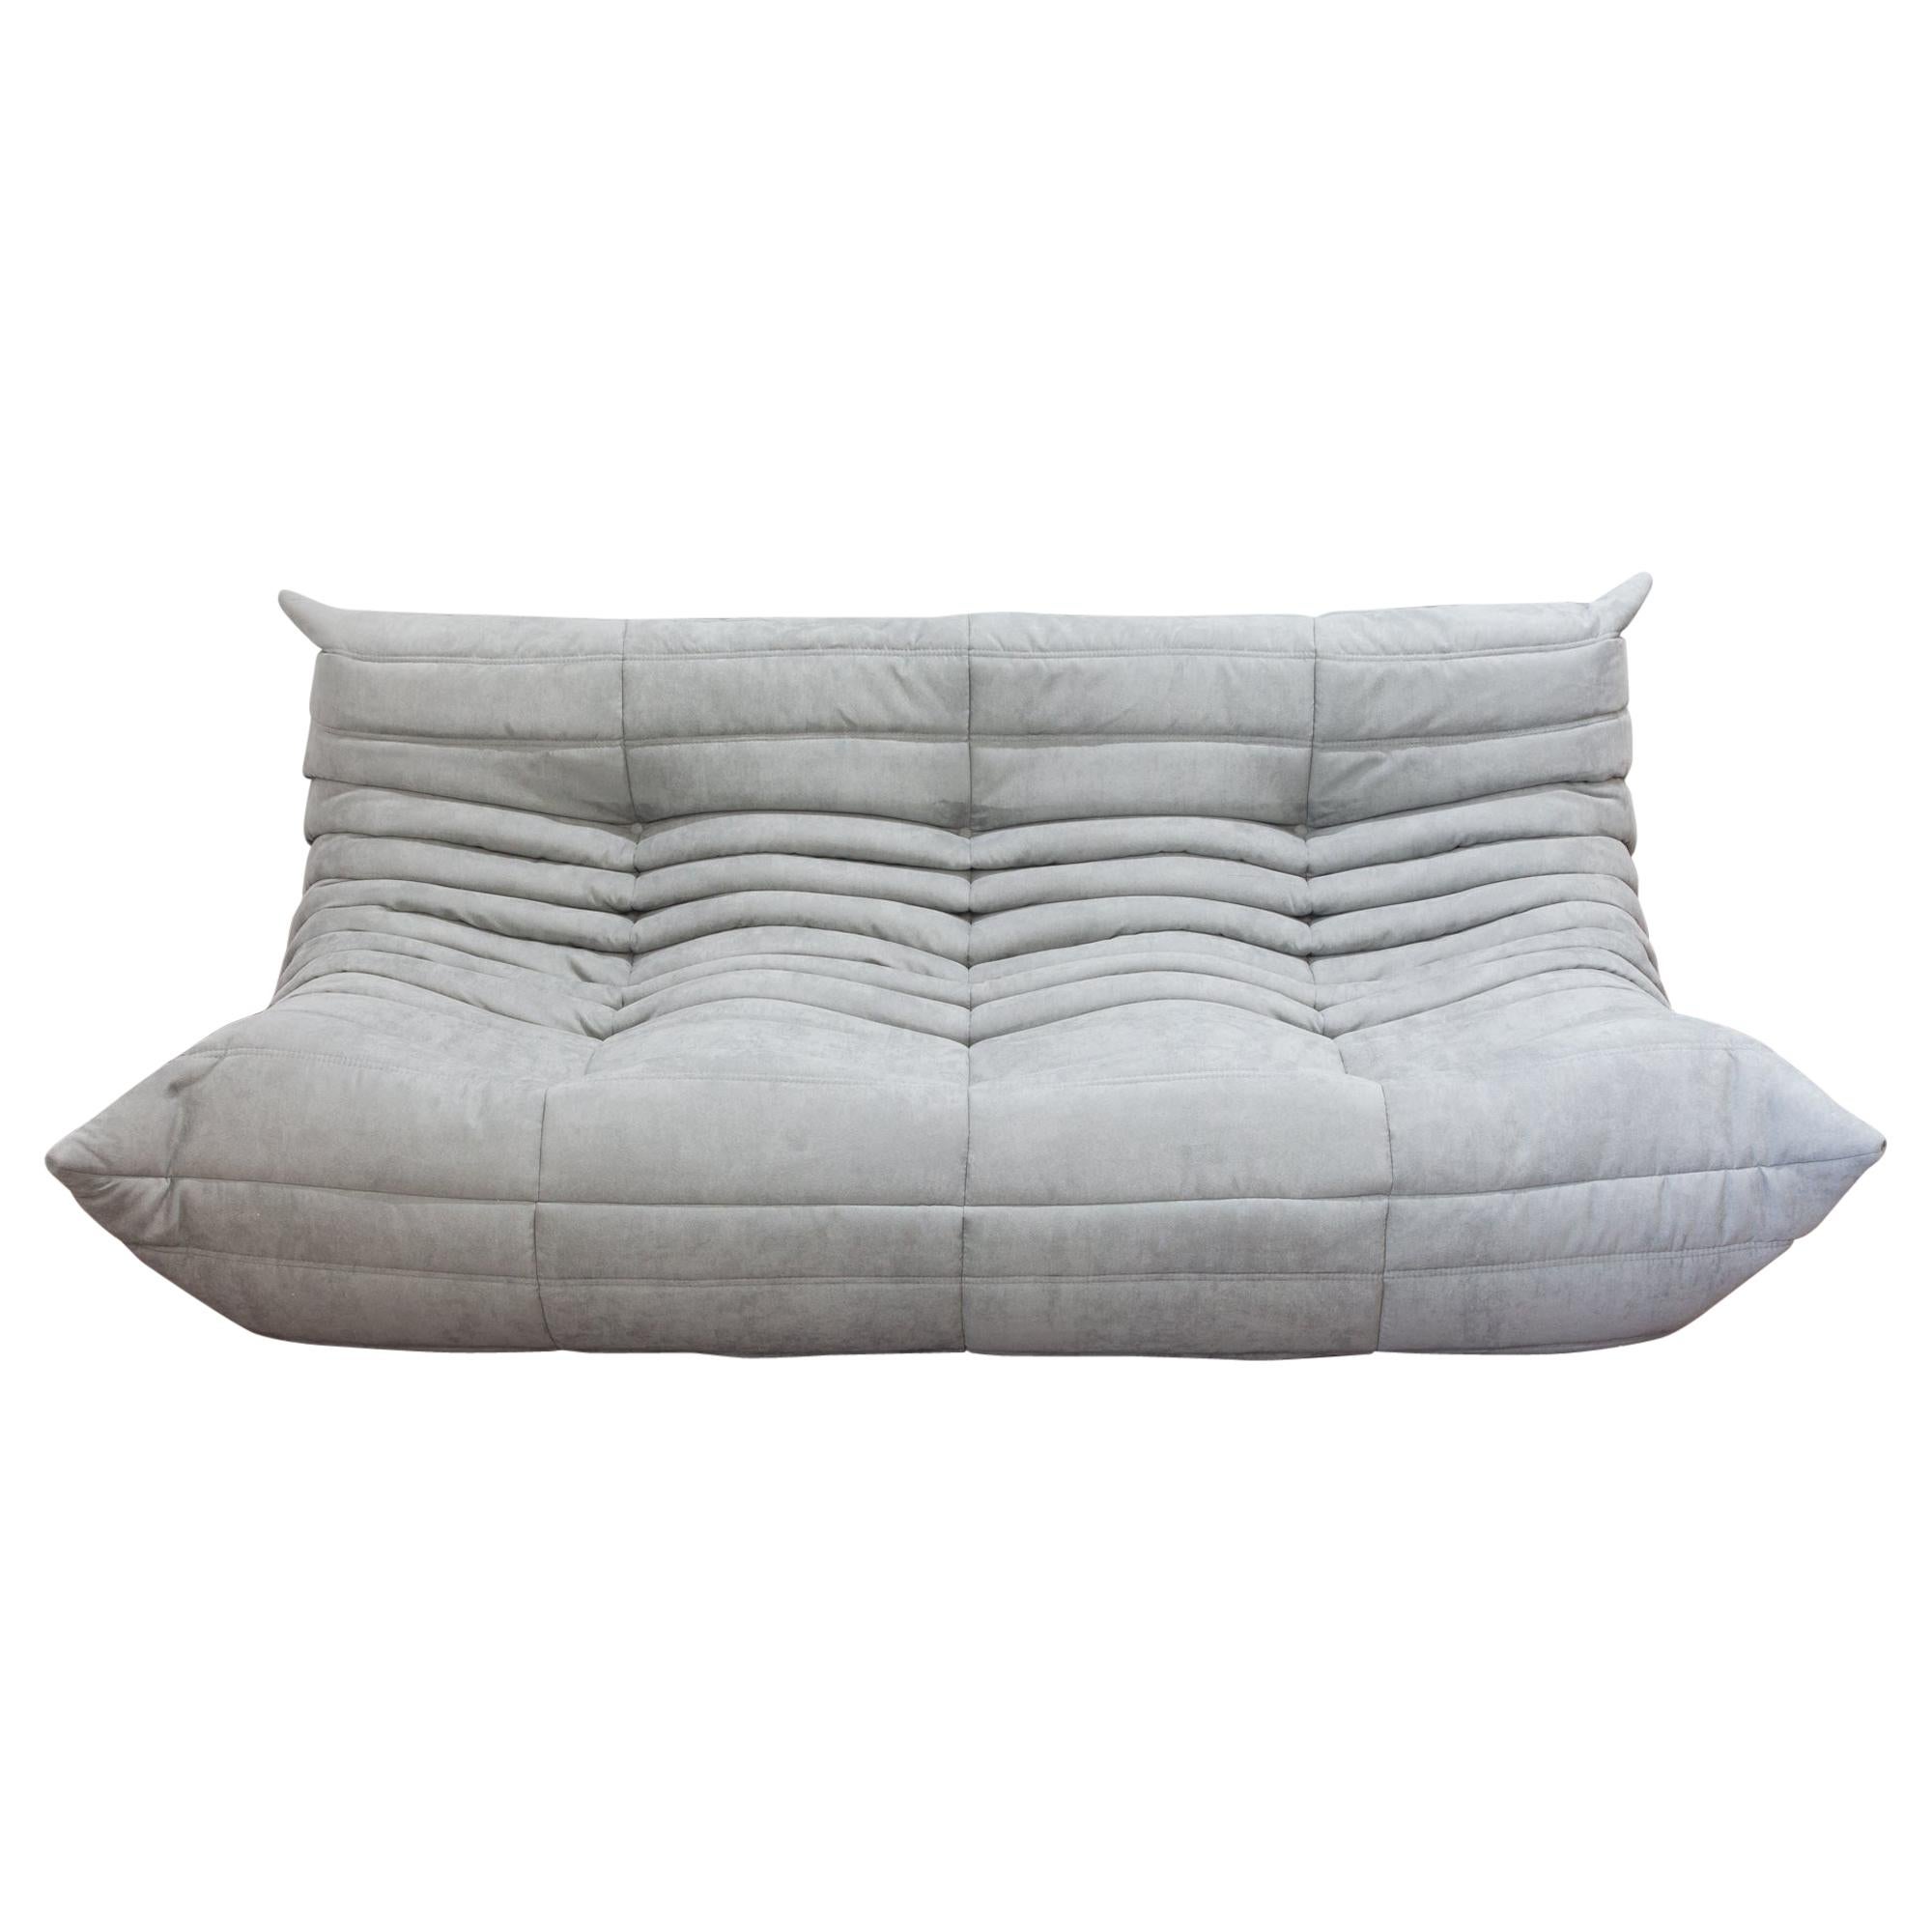 Togo 3-Seat Sofa in Light Grey Microfibre by Michel Ducaroy for Ligne Roset For Sale